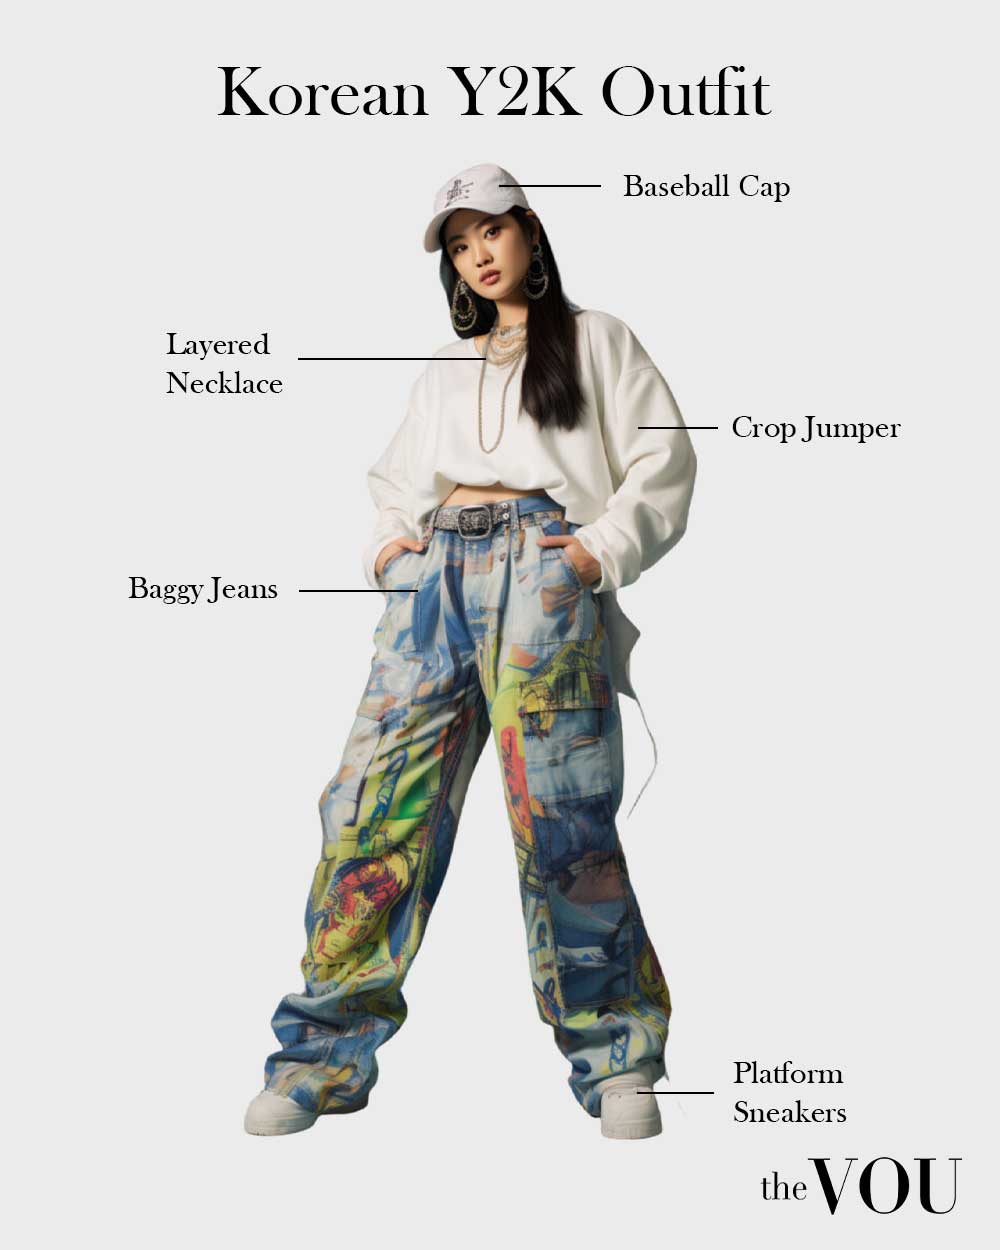 Korean Y2K style outfit